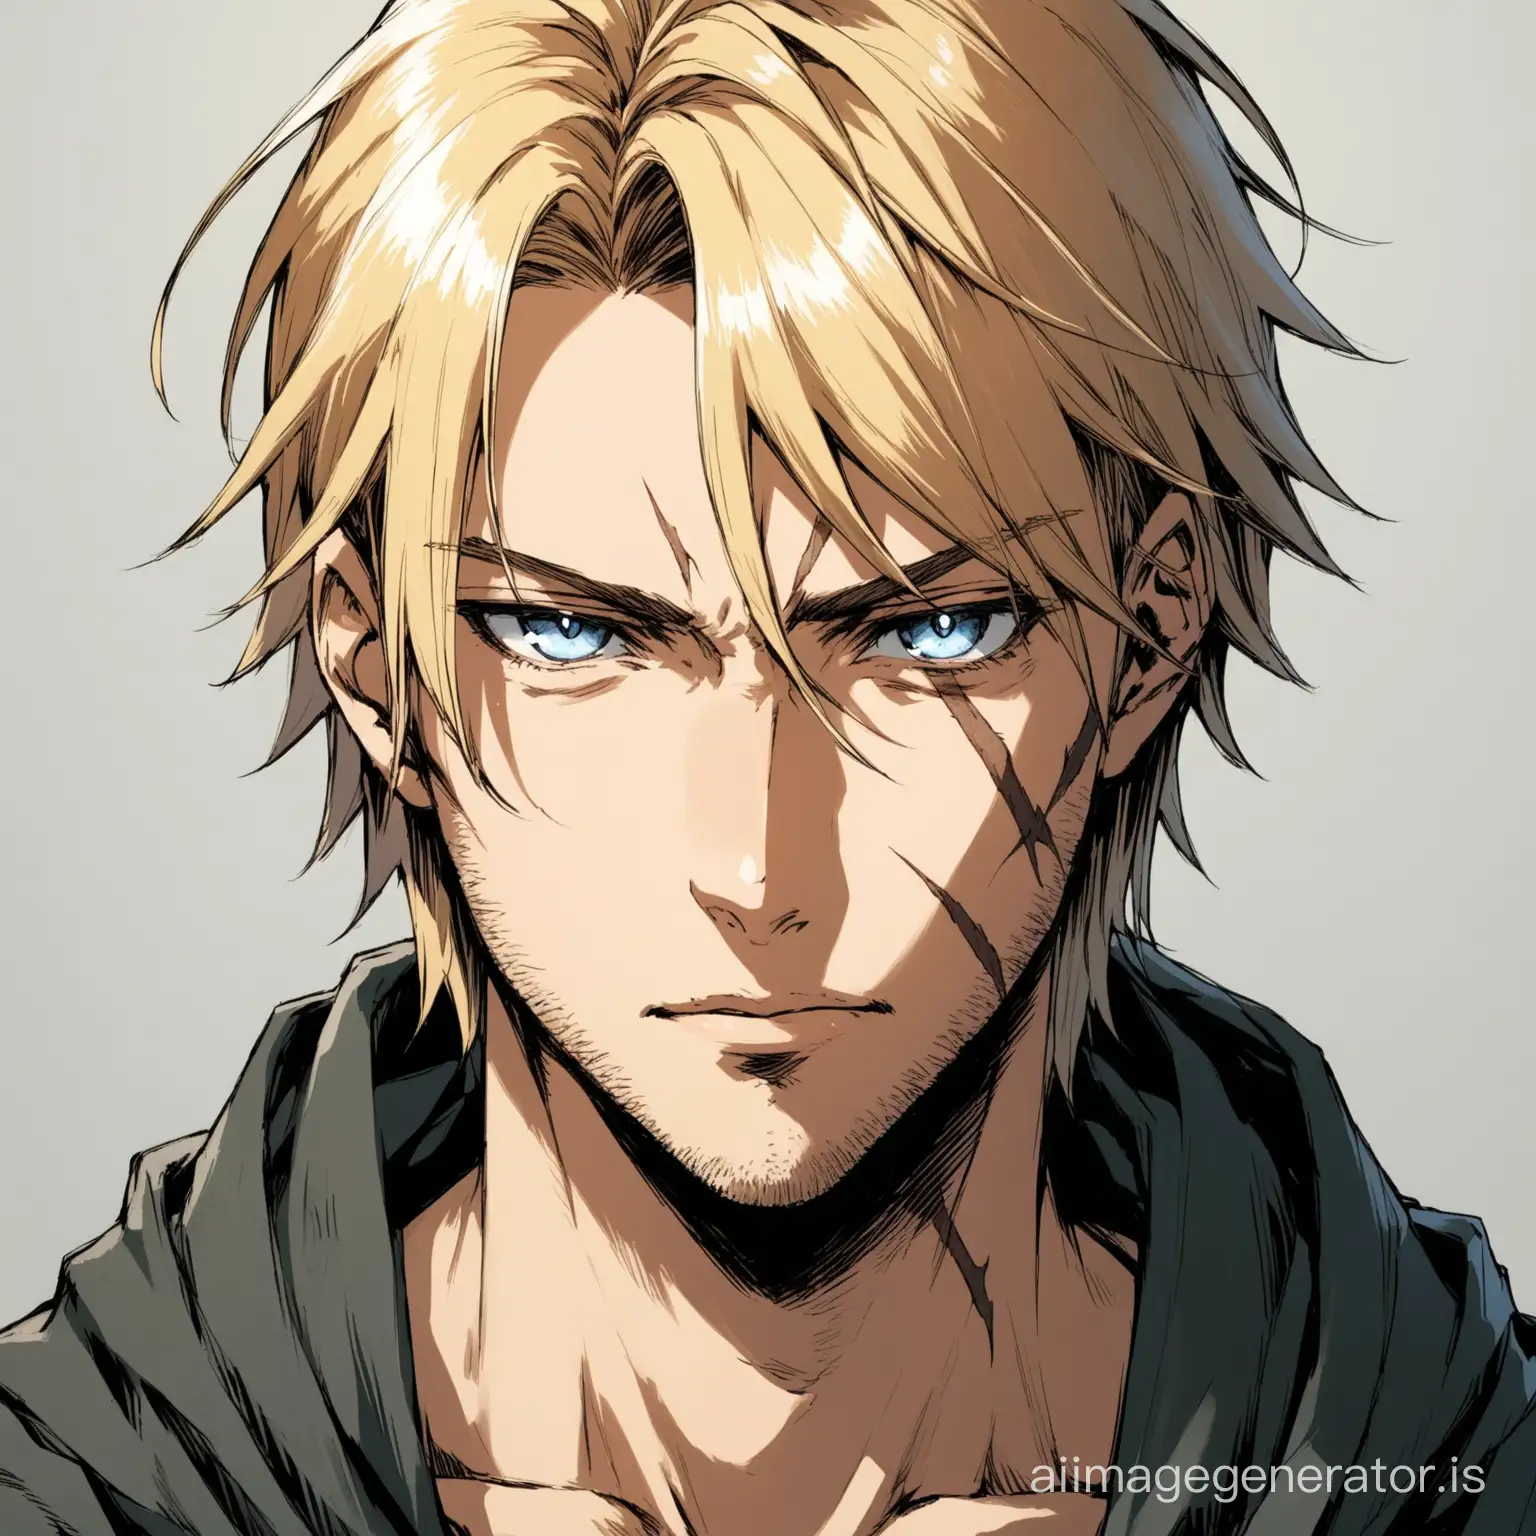 Anime, man, portrait, black worn clothes, bristle, blond, Russian, grey-blue eyes, a one long scar goes from the mouth. 30 years old